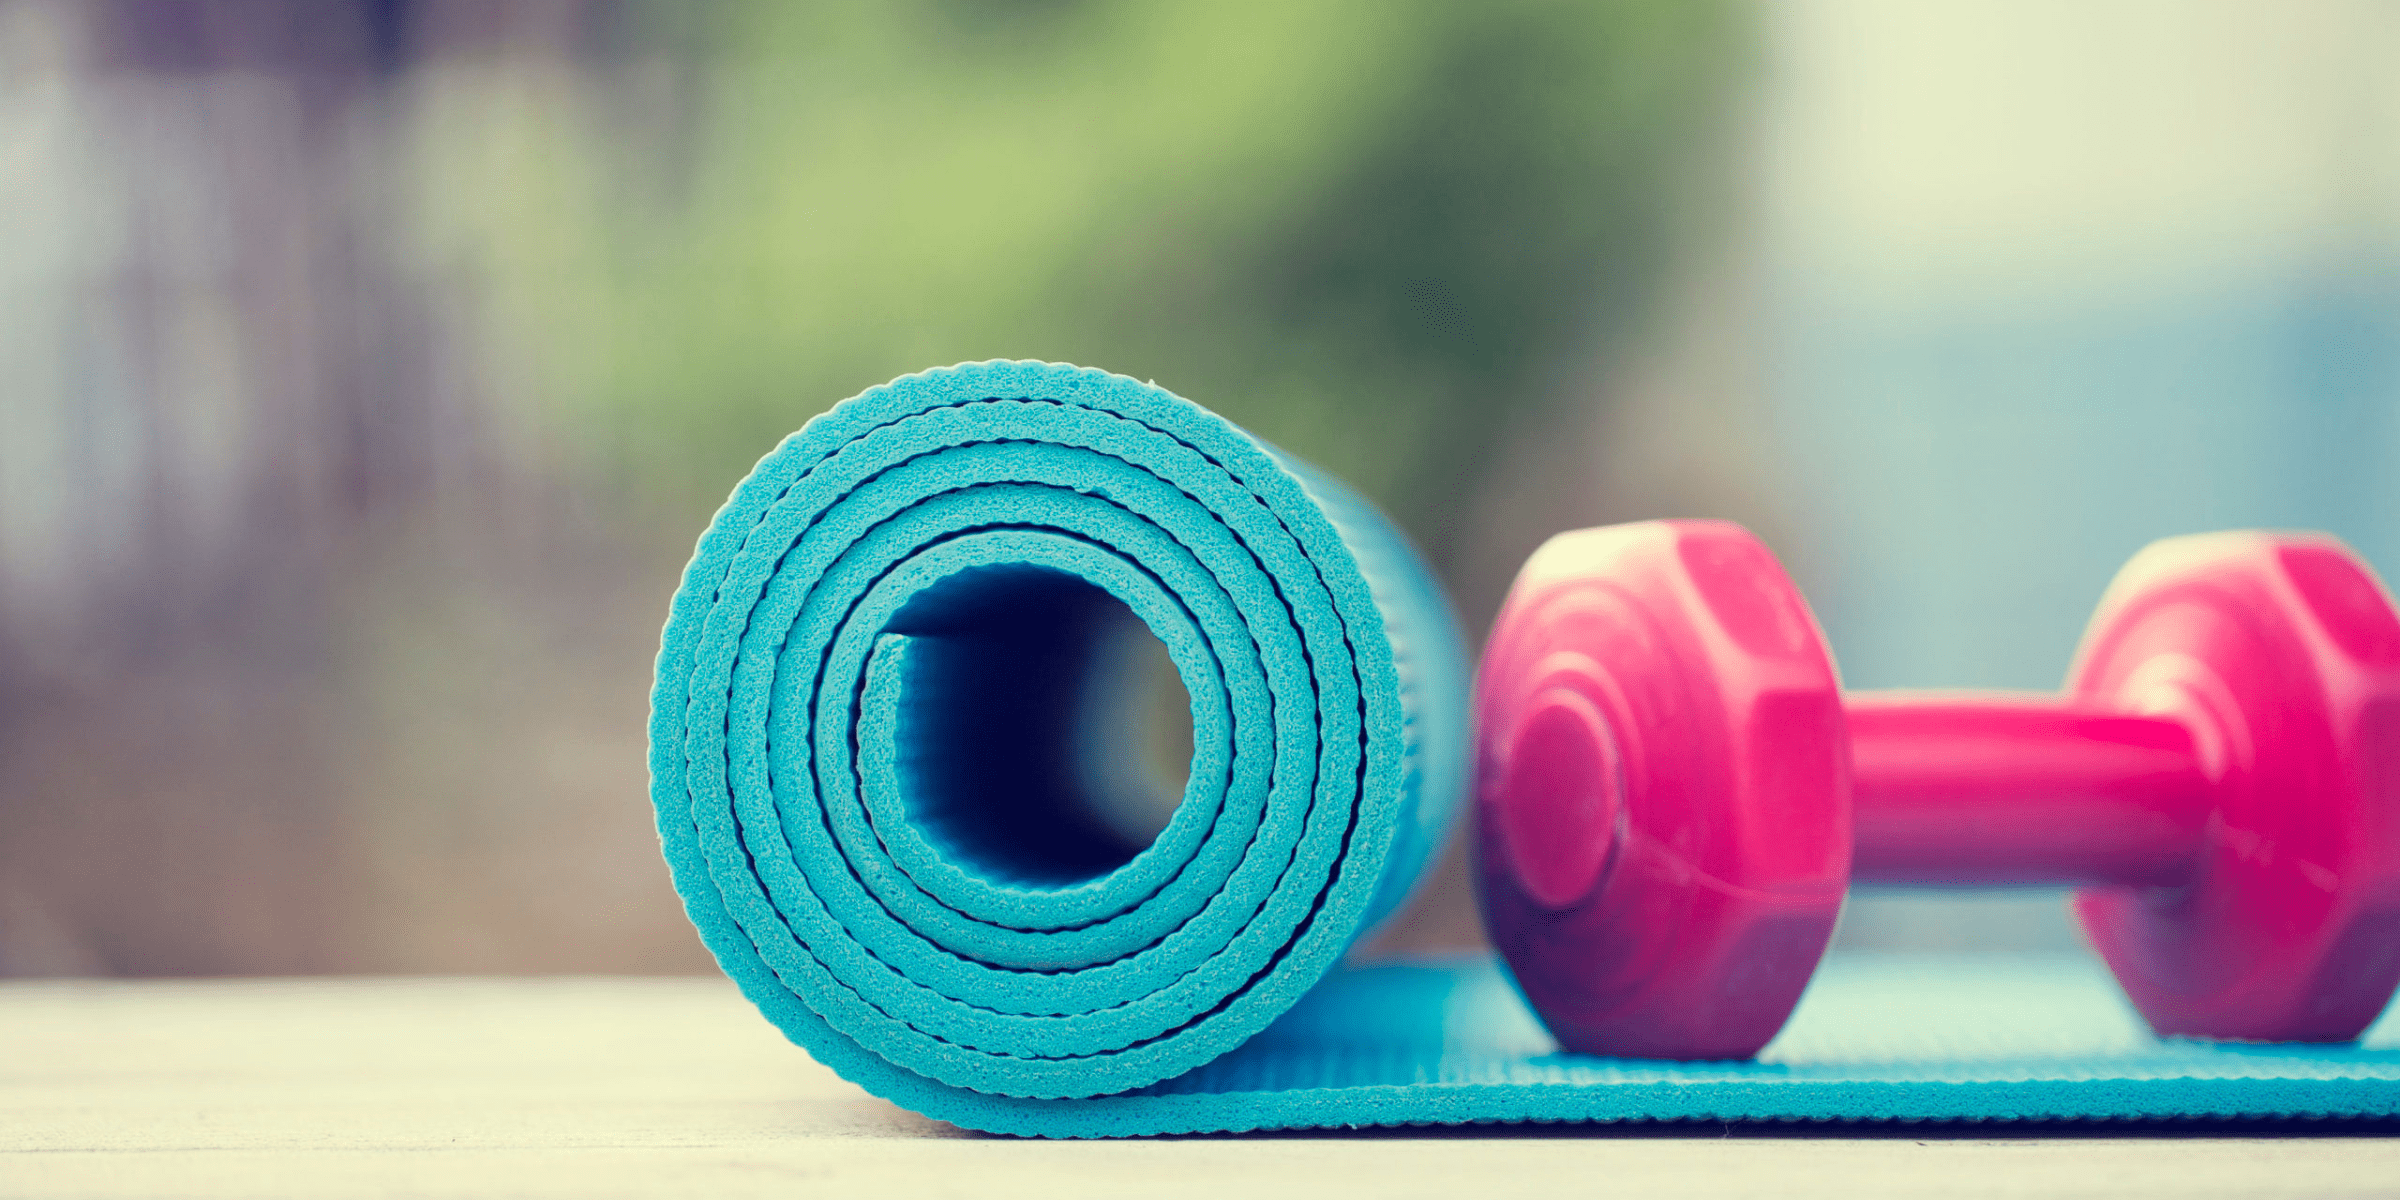 How to Make Homemade Dumbbells For Free at Home